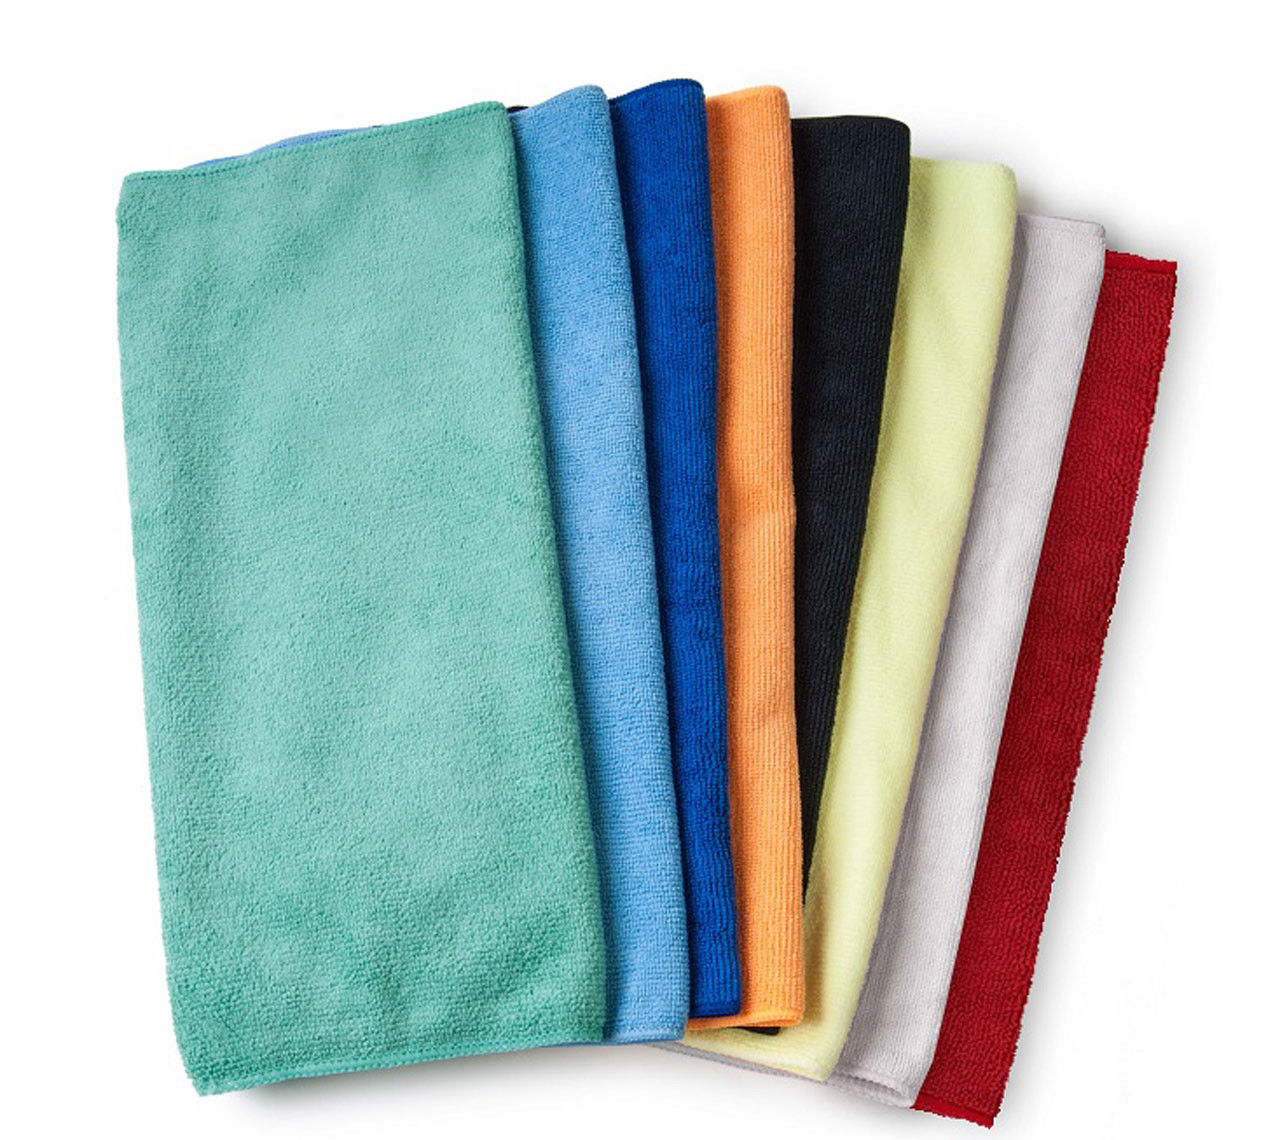 What is the weight of these bulk golf towels I'm considering purchasing?